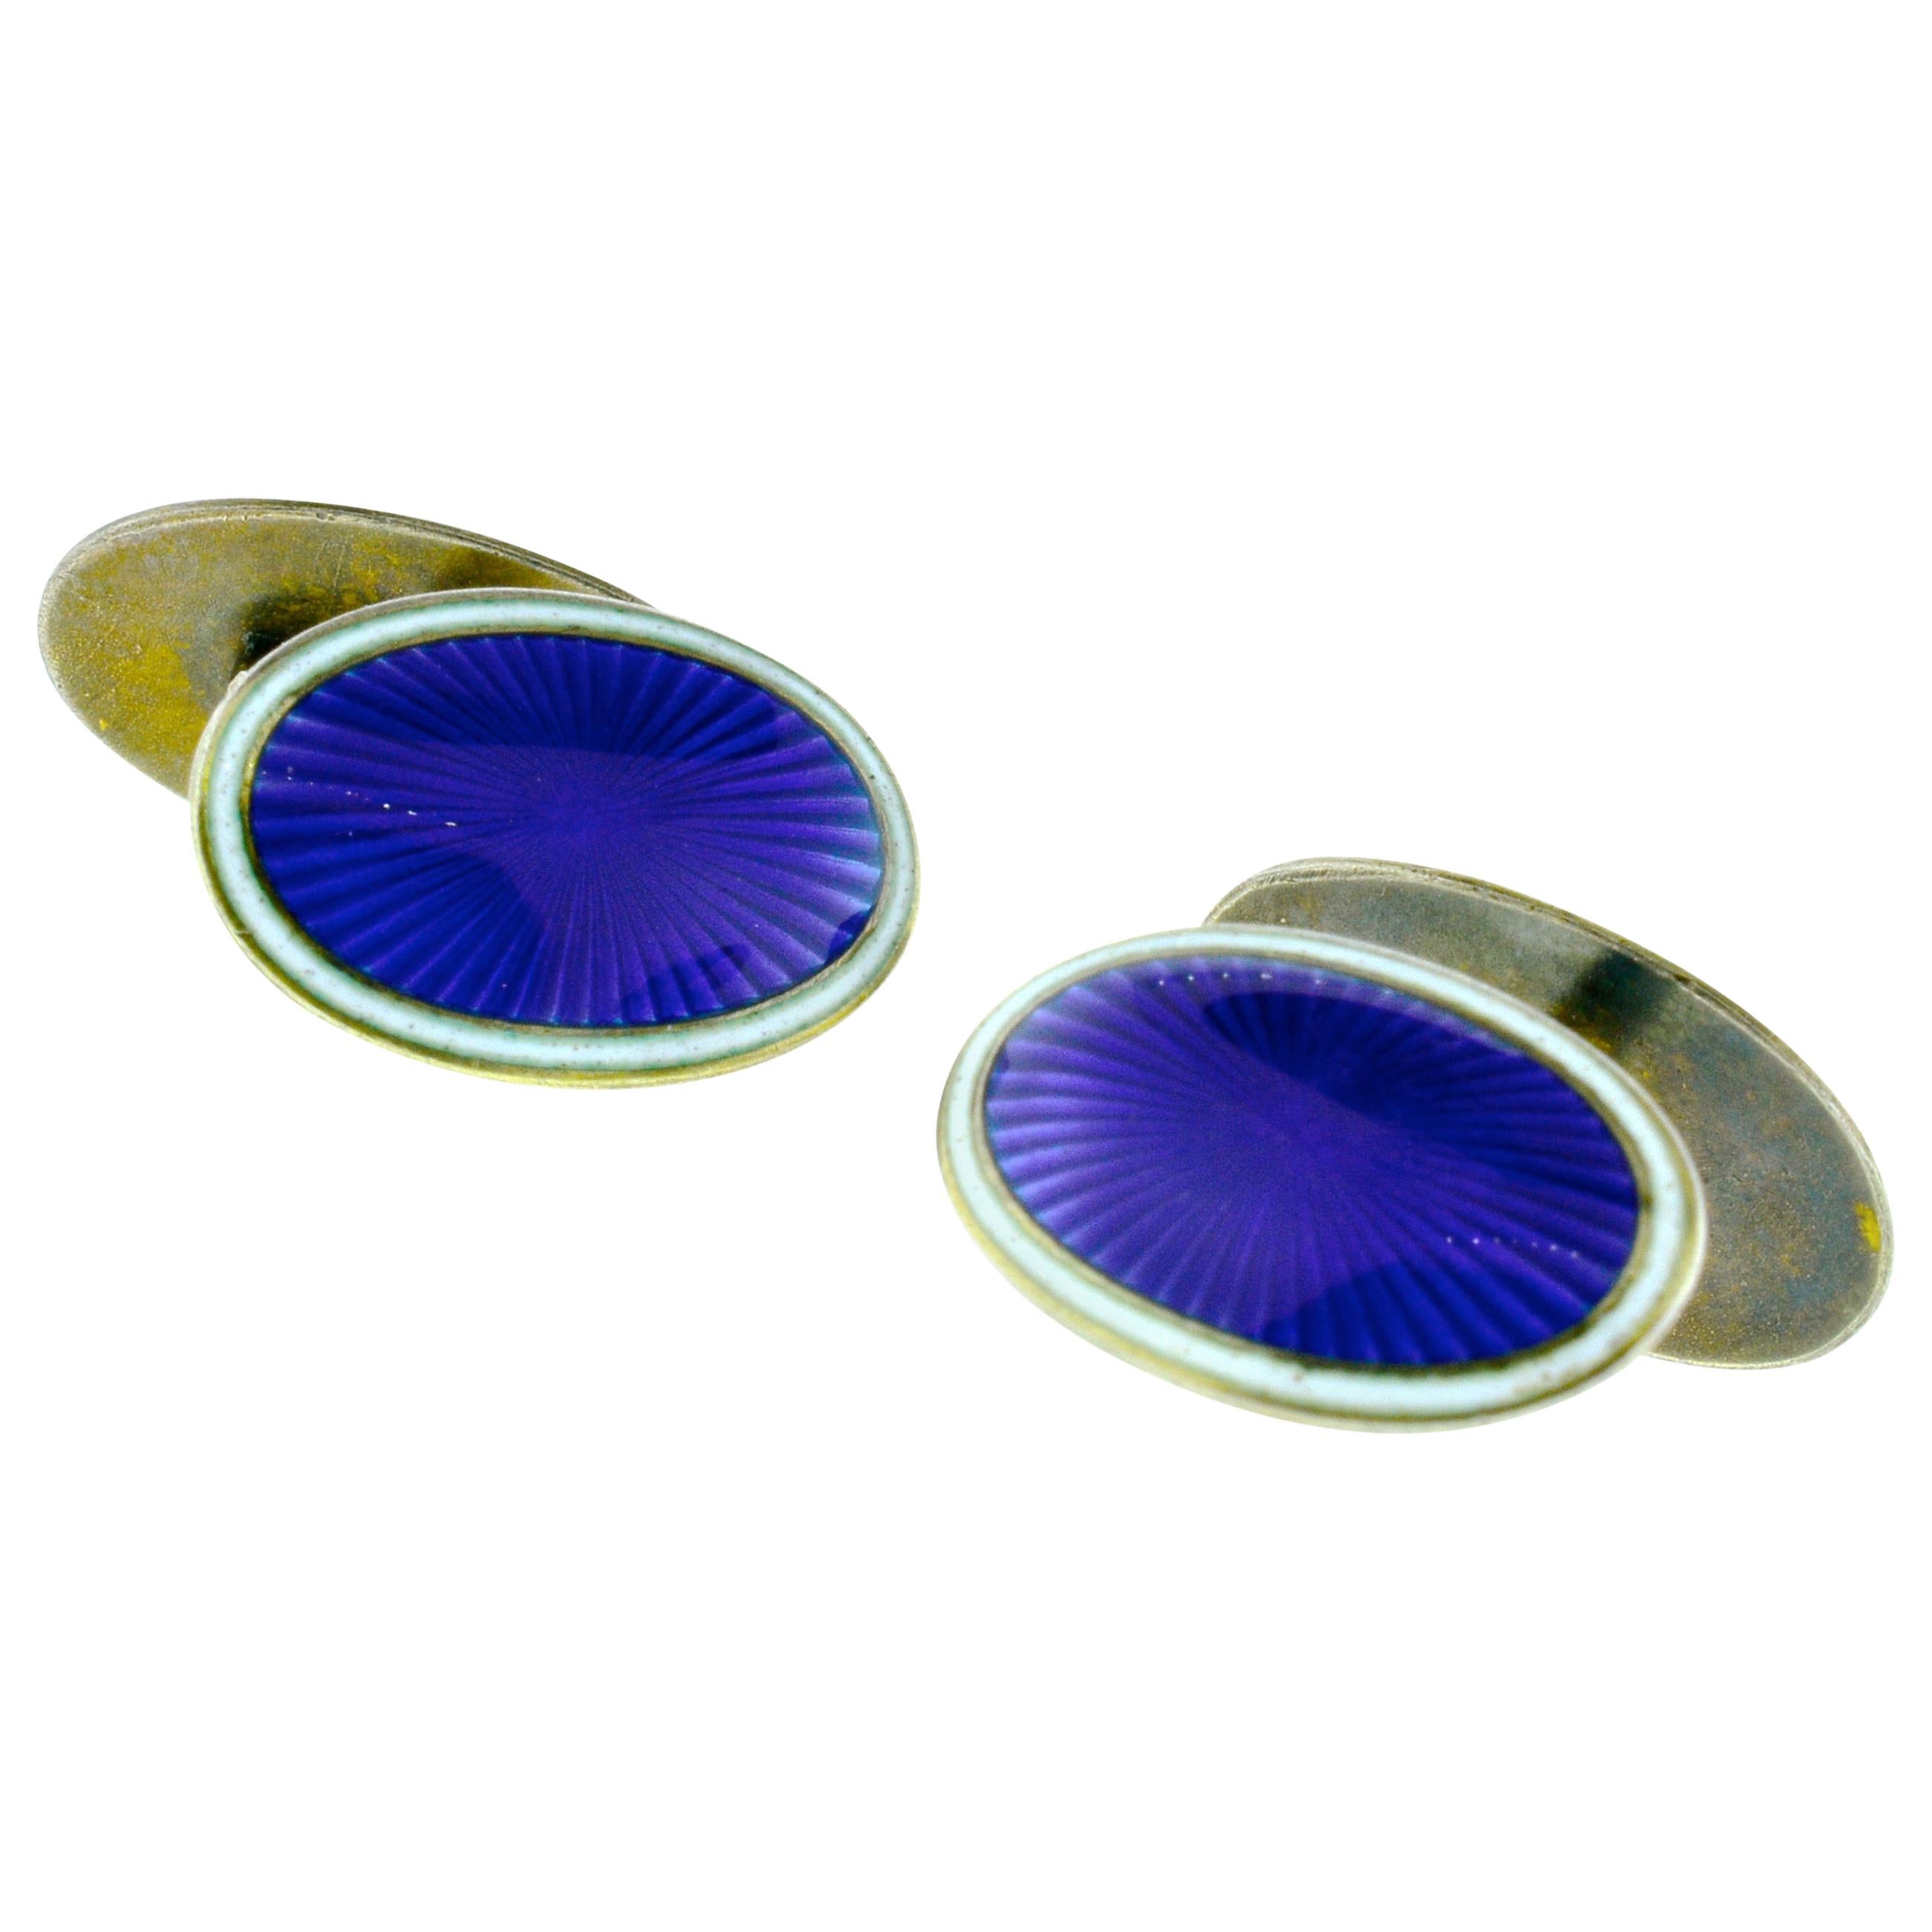 Enamel back to back Art Deco silver cufflinks  The guilloche enamel is a bright royal blue/purple with white opaque enamel on the edges.  These back to back cufflinks are sterling, circa 1930, American. For the ease of putting through the shirt, one